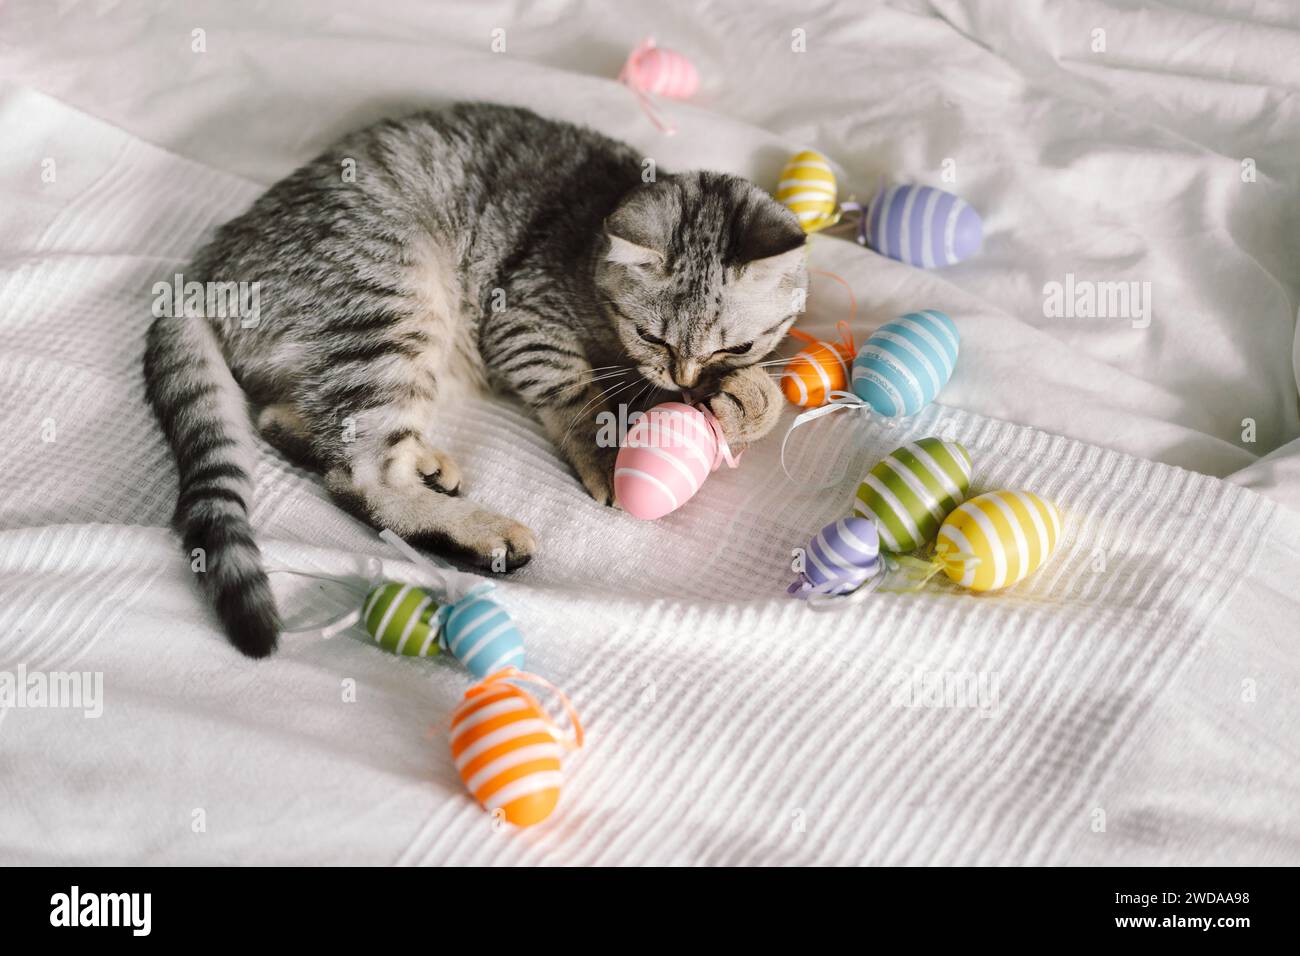 Cute kitten of the Scottish straight breed playing with multi-colored ...